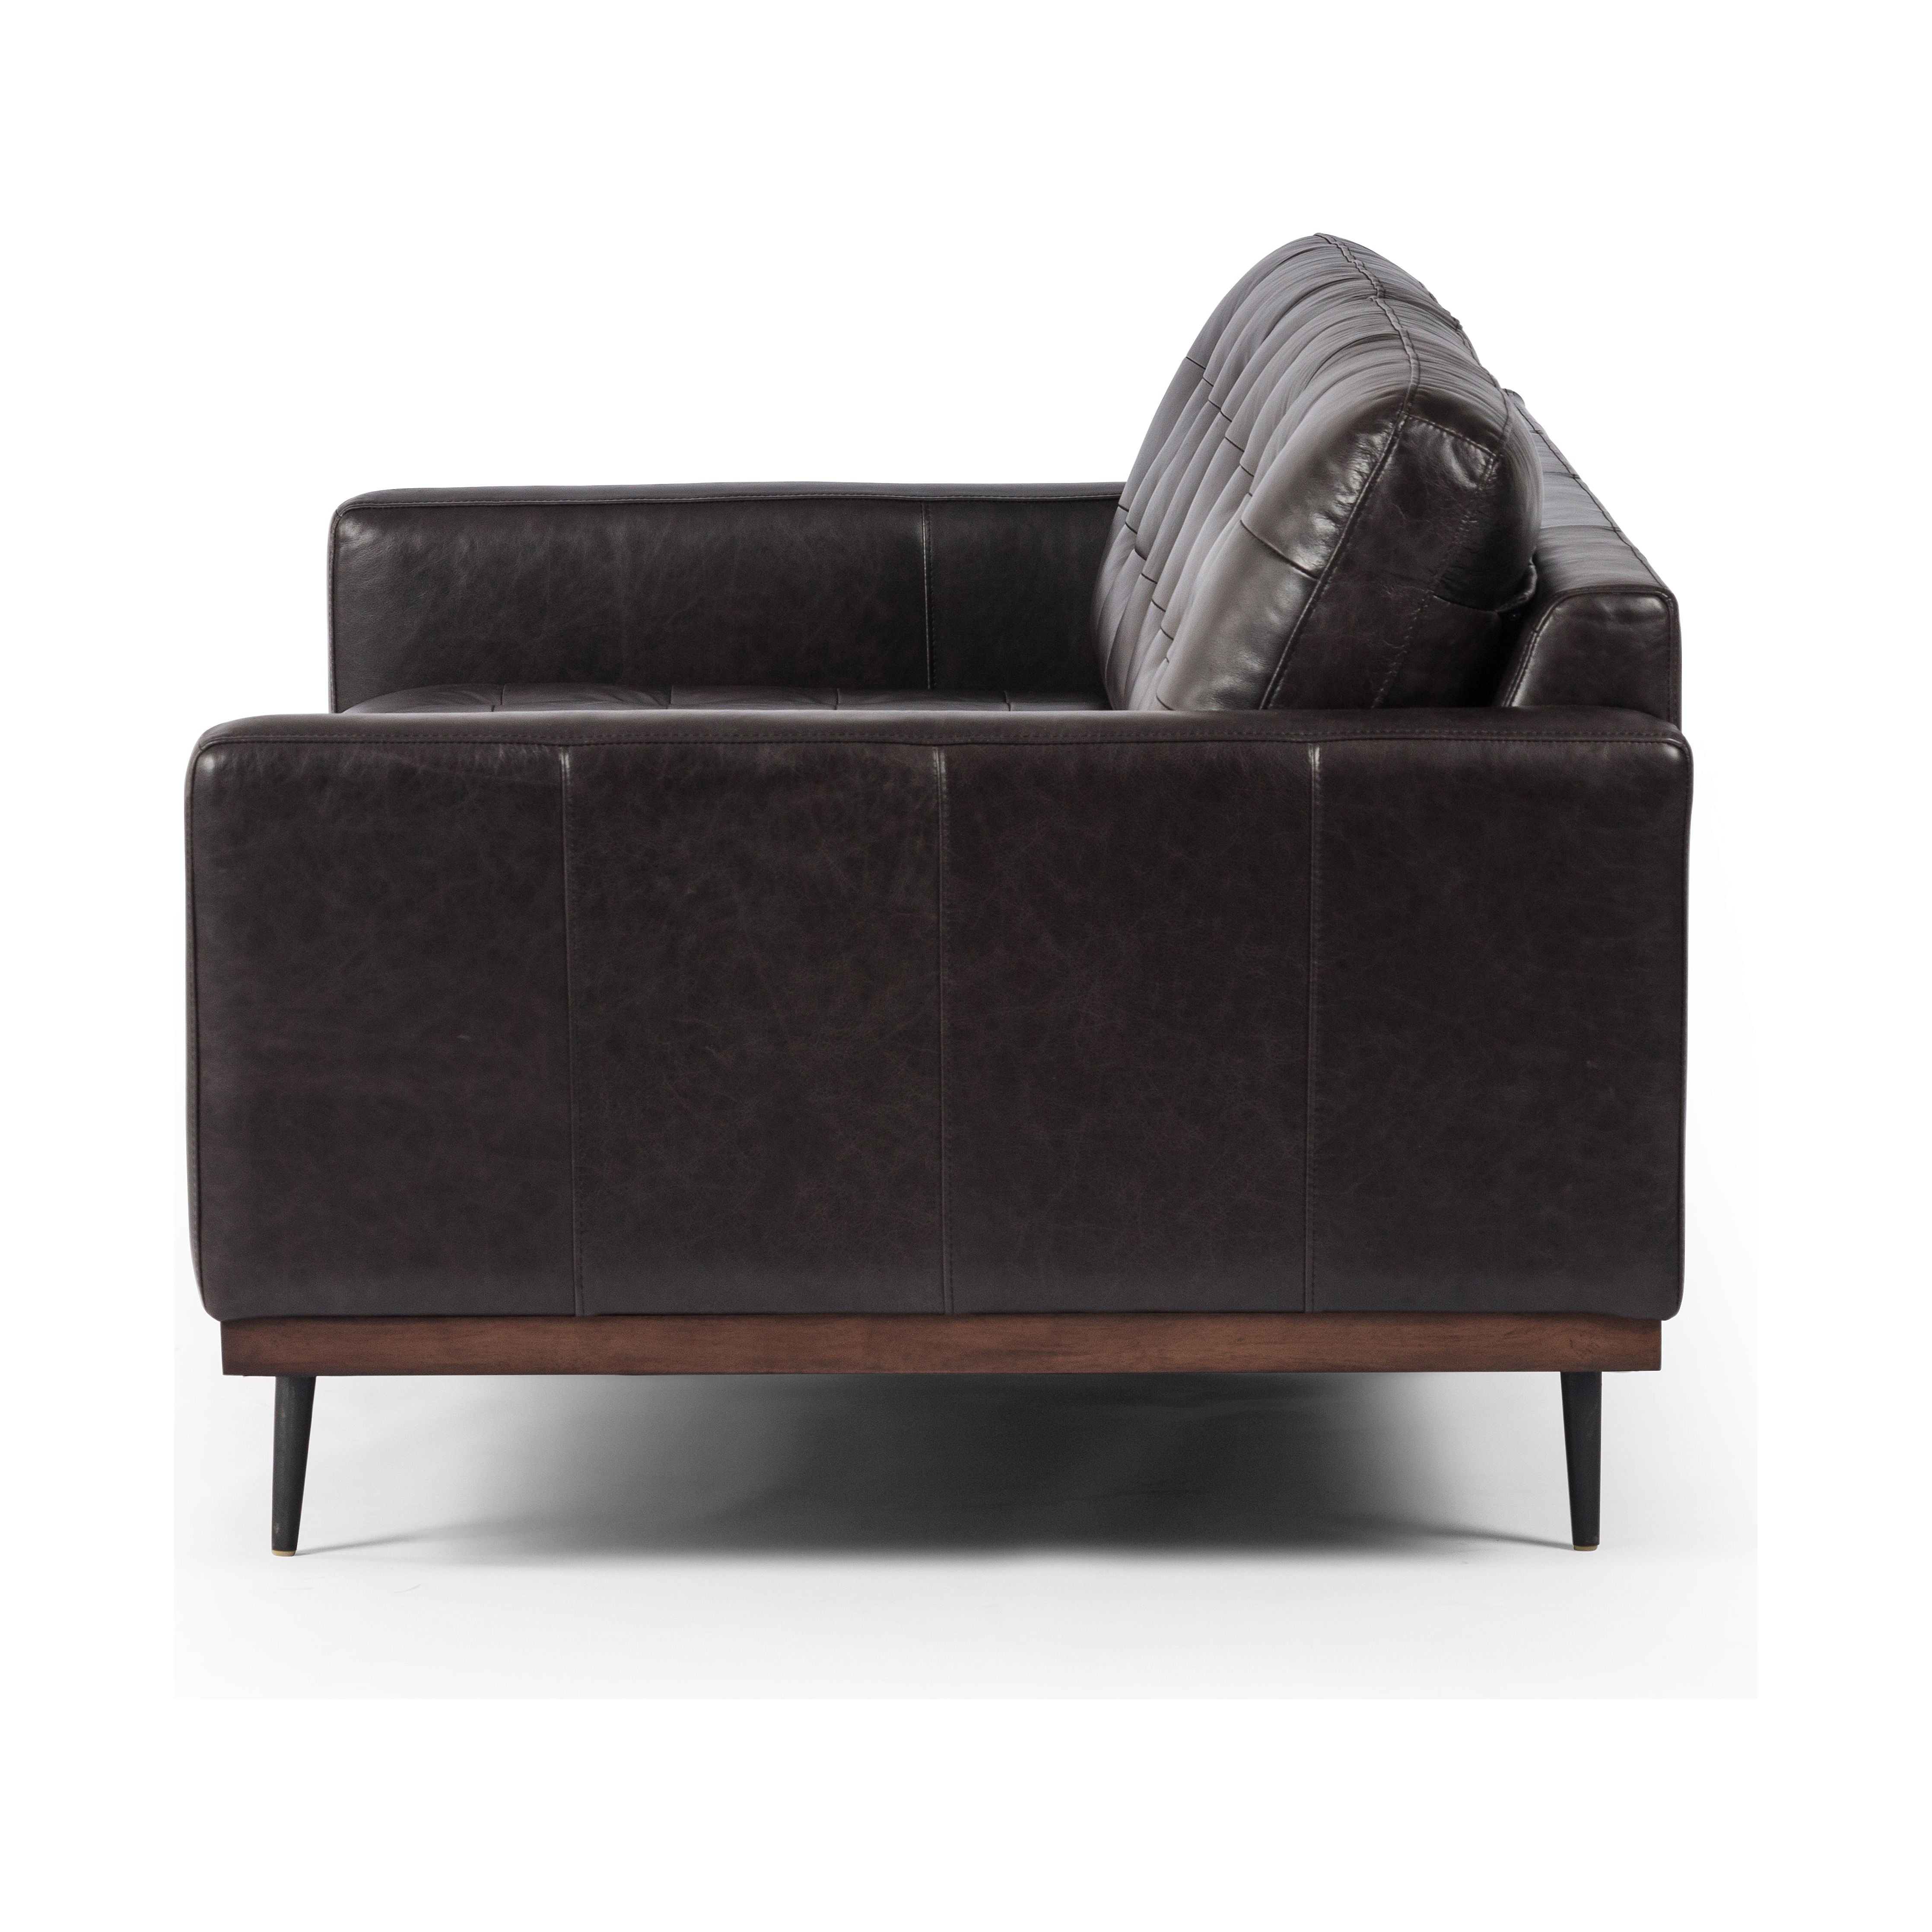 Low-leaning style with mid-century vibes. Upholstered in an exclusive subtly distressed black top-grain leather, with button tufting for texture and comfort. Finished with wrap-around framing and cone-tapered legs. Amethyst Home provides interior design, new construction, custom furniture, and area rugs in the Seattle metro area.